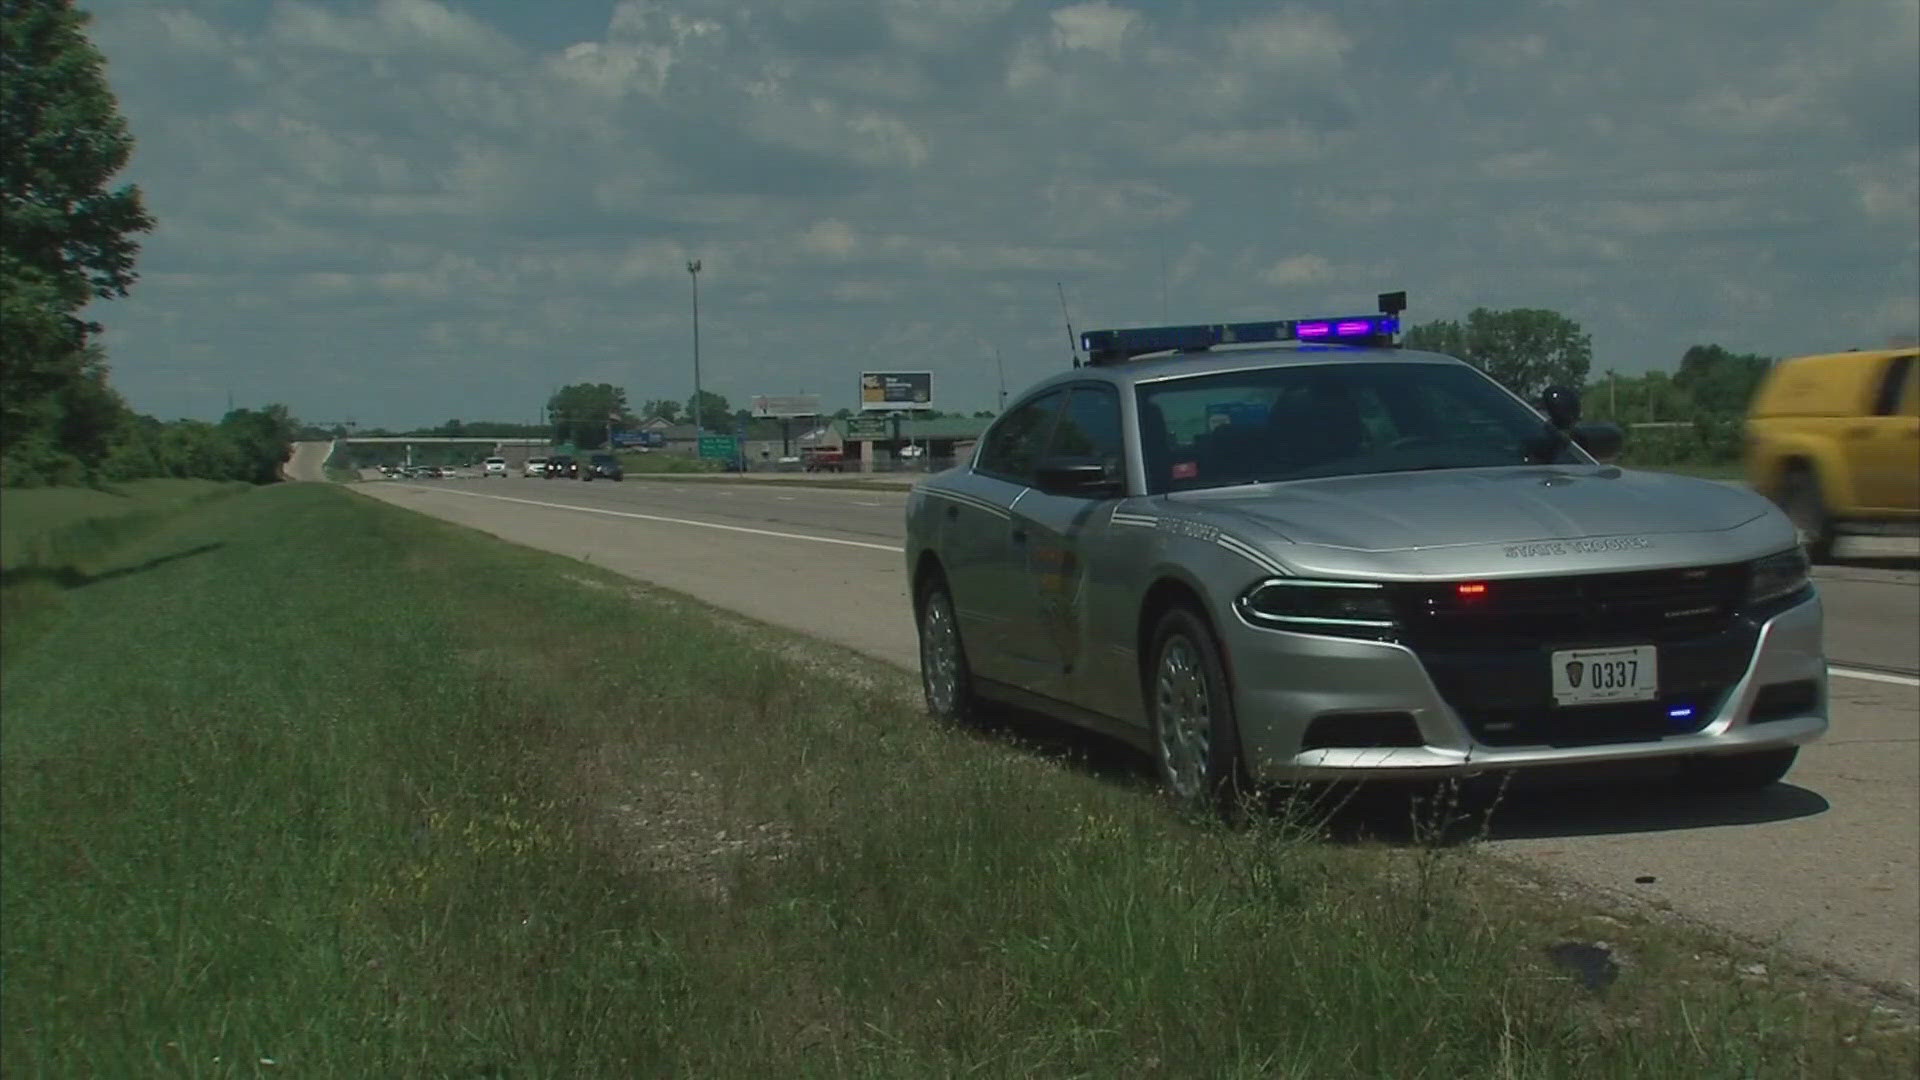 Ohio State Highway Patrol is stepping up enforcement on the roads for the 4th of July weekend.